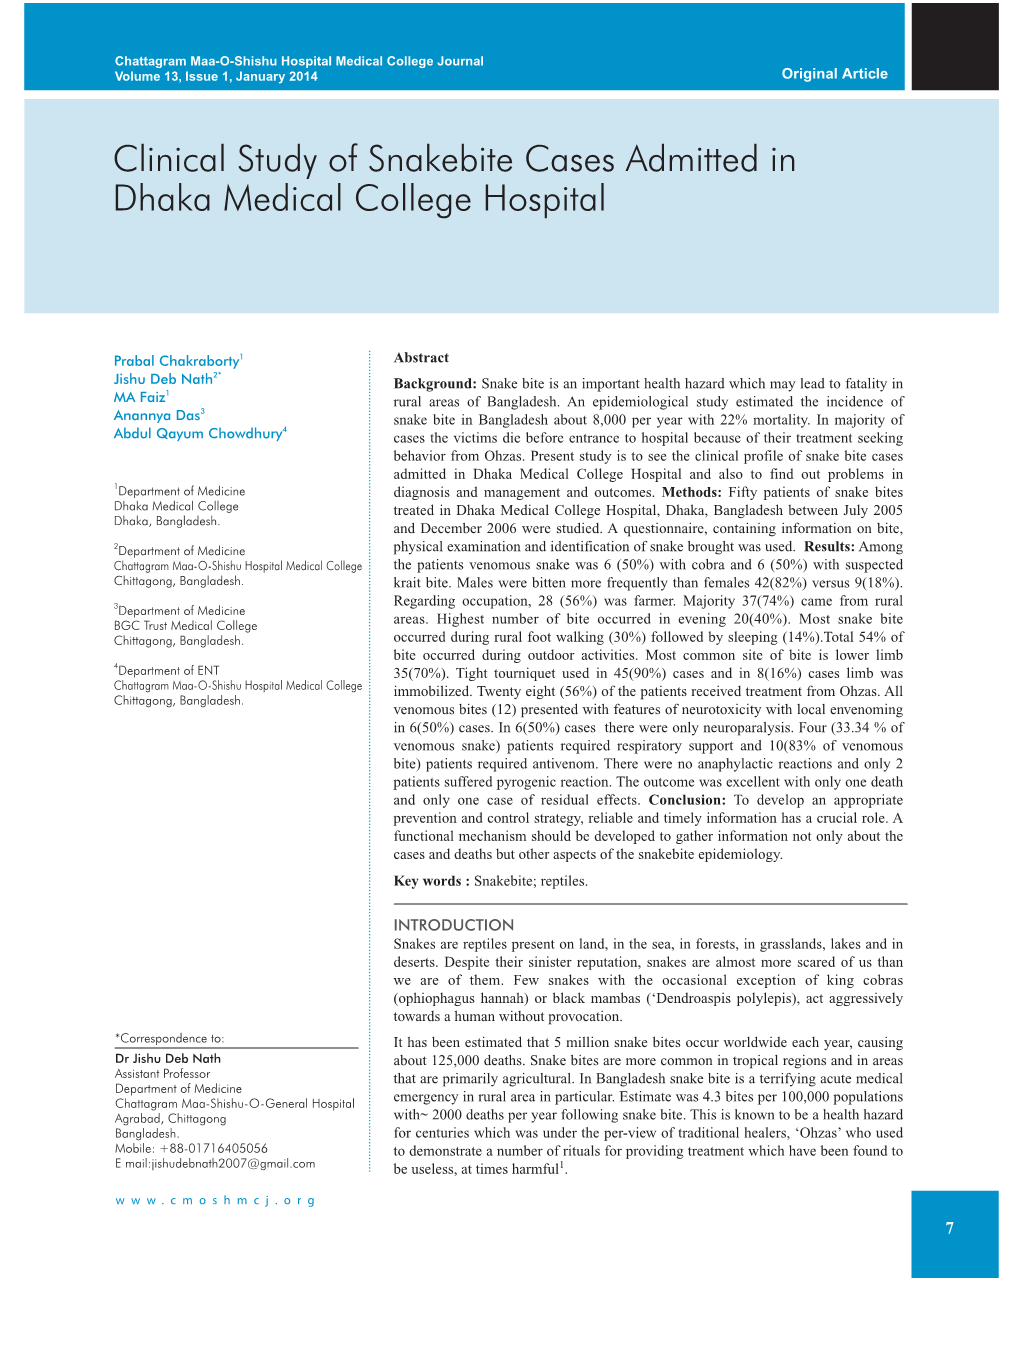 Clinical Study of Snakebite Cases Admitted in Dhaka Medical College Hospital